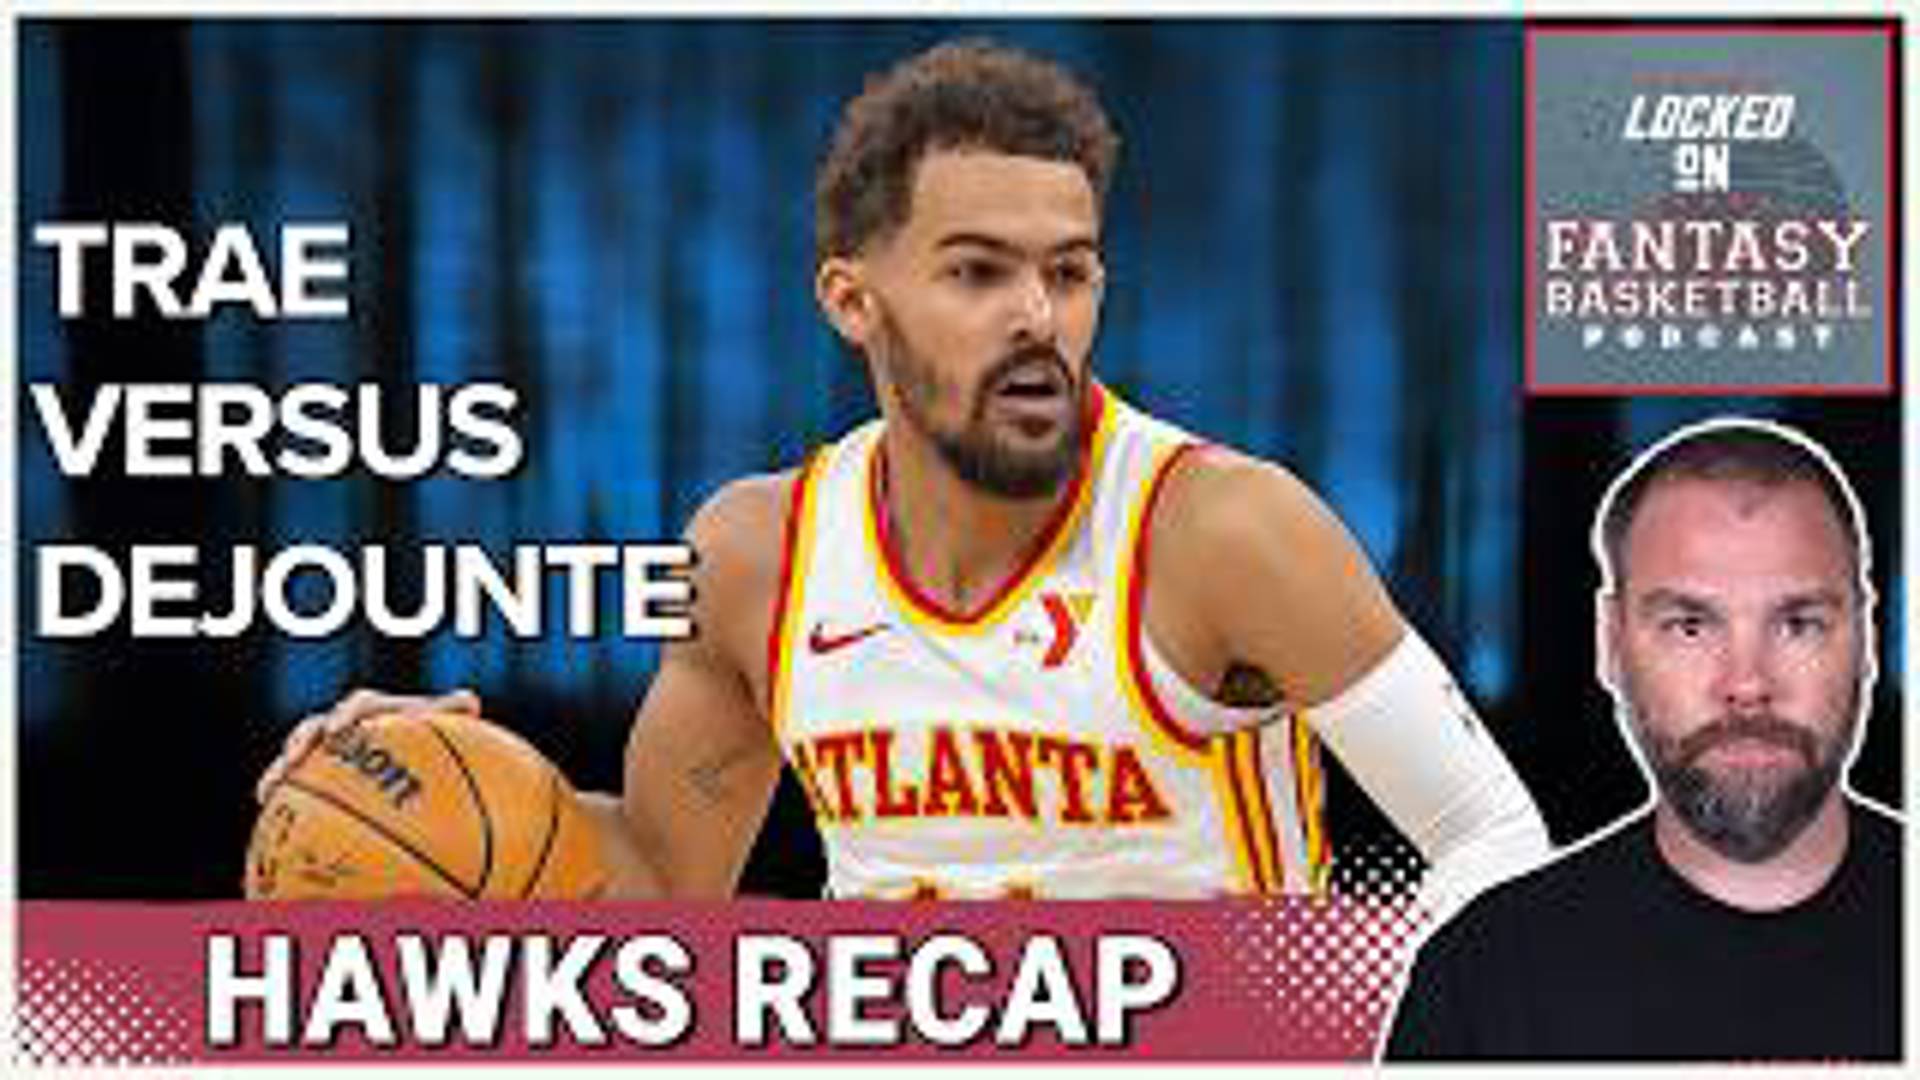 Josh Lloyd explores the Atlanta Hawks' tumultuous season, from the chemistry struggles between Trae Young and Dejounte Murray.